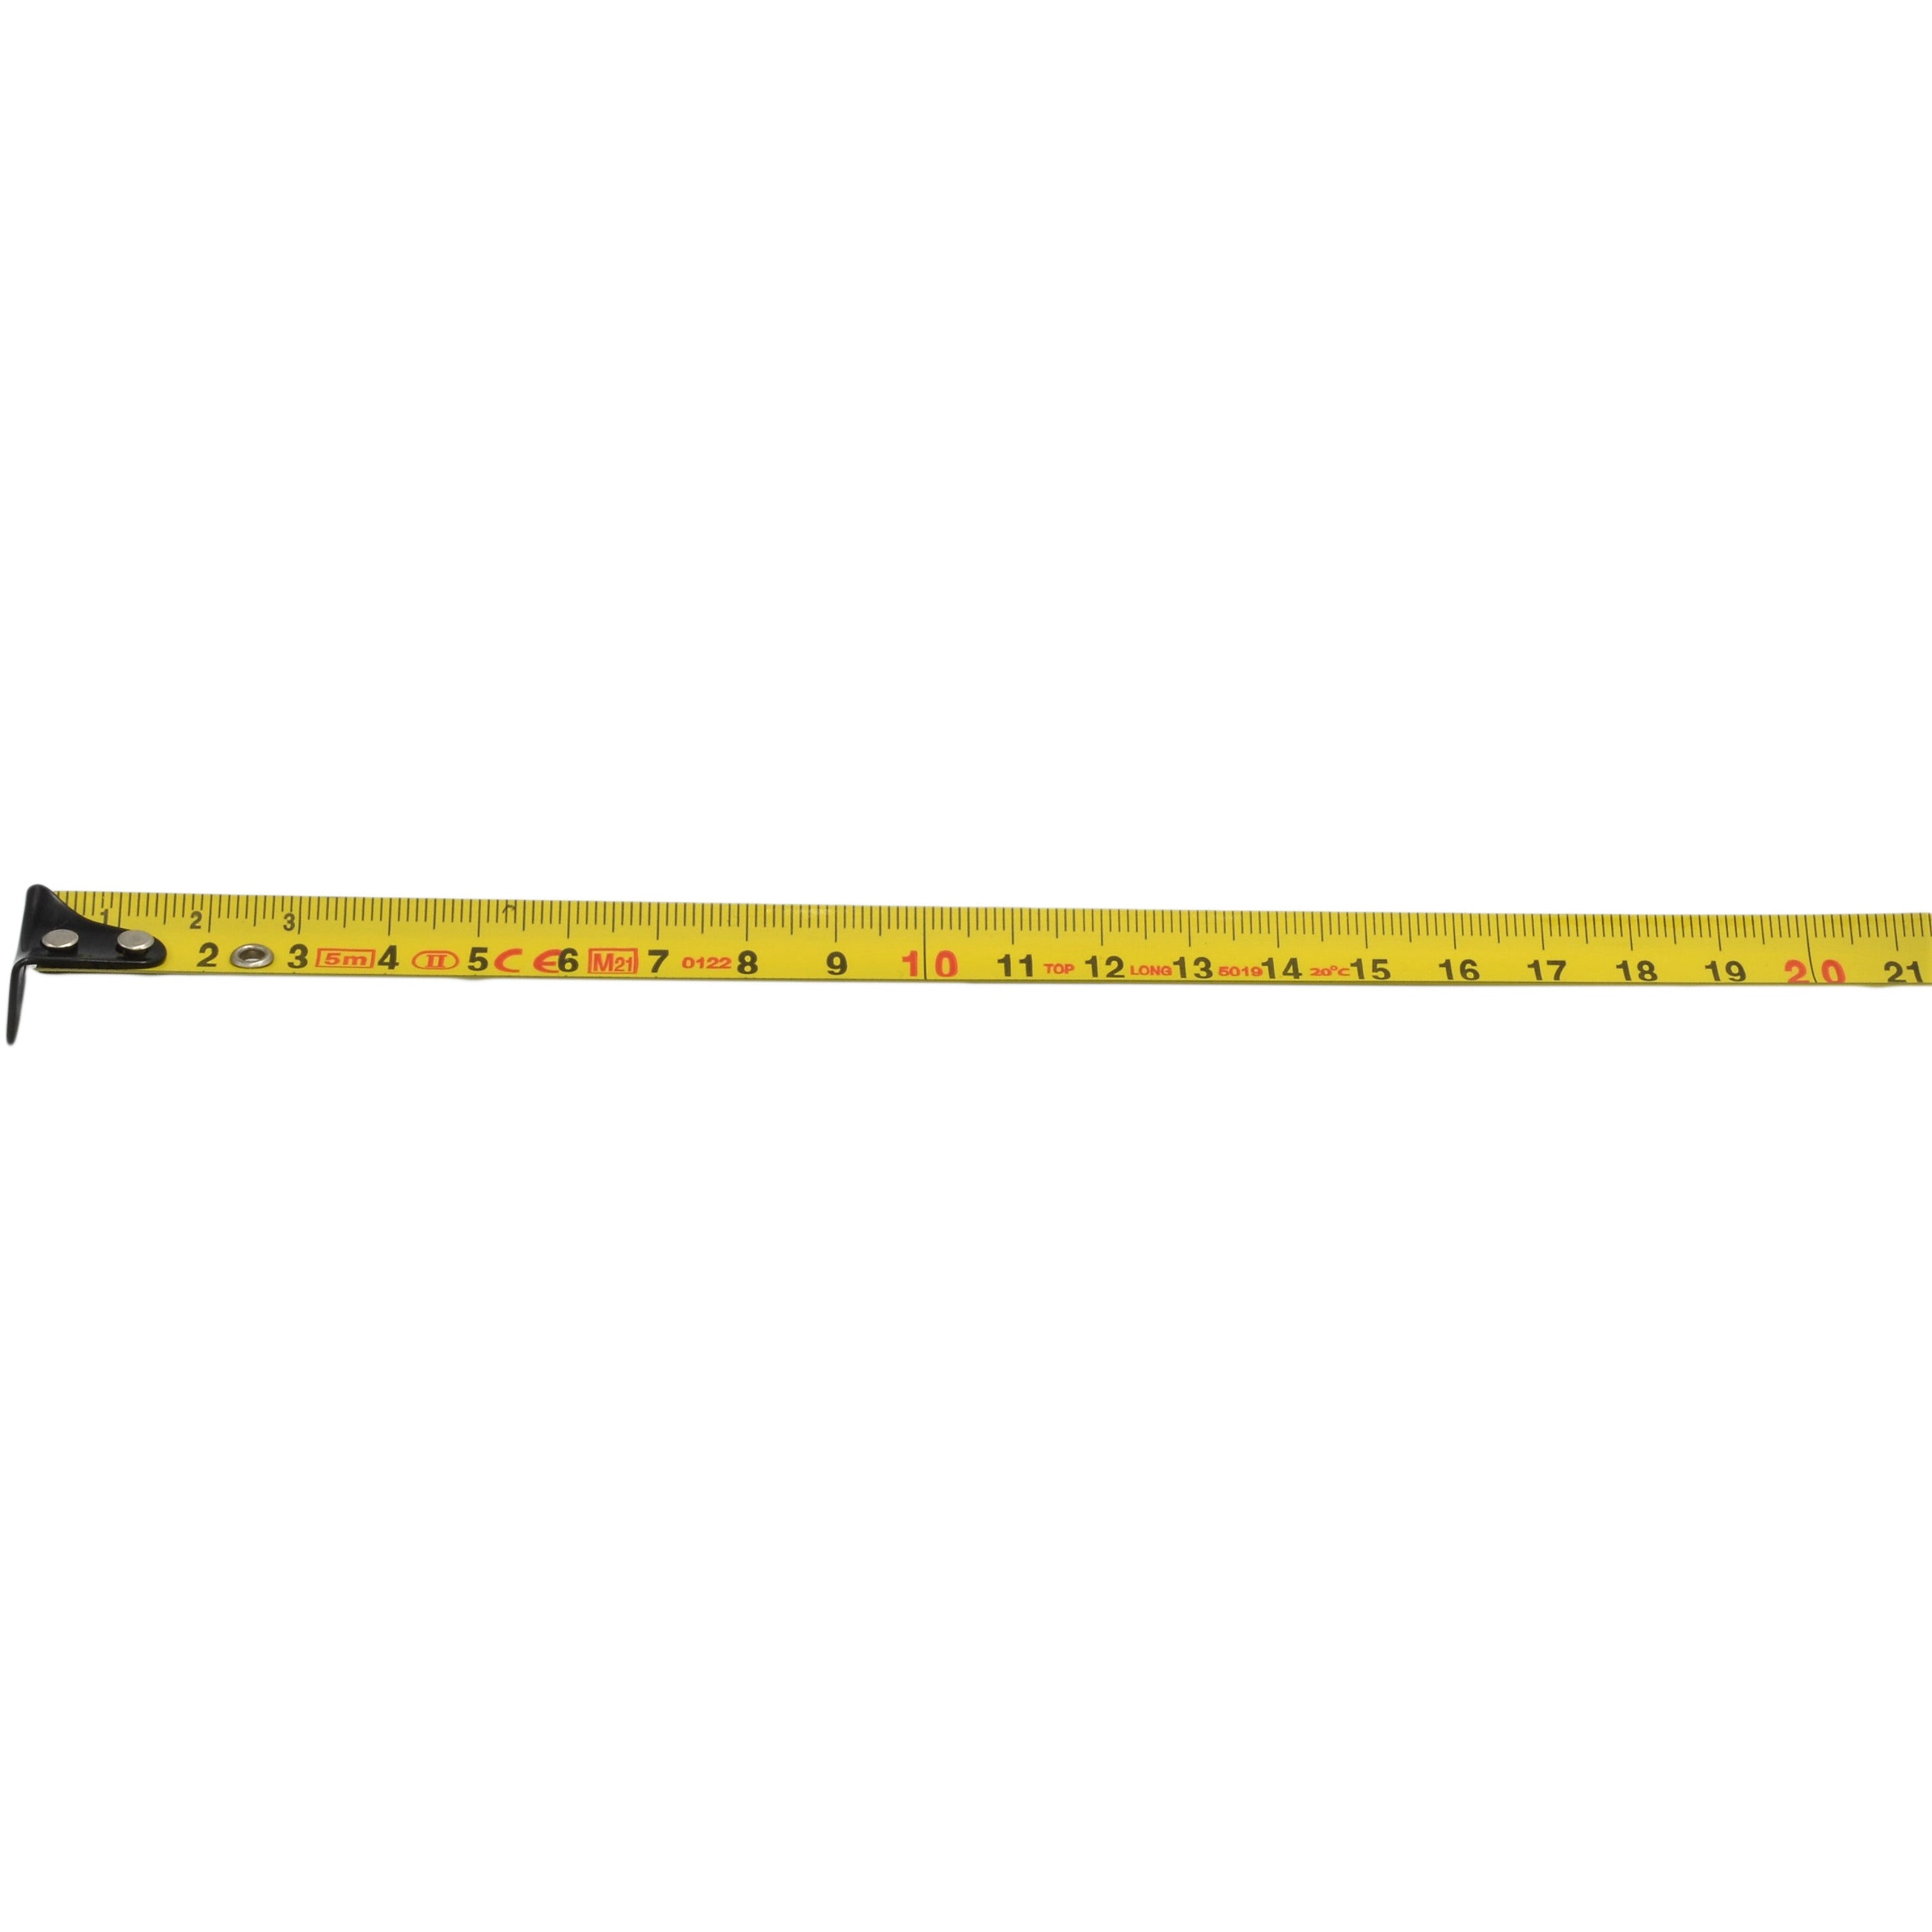 Insize Metric 5M Tape Measure with Auto Retract Series 7140-5